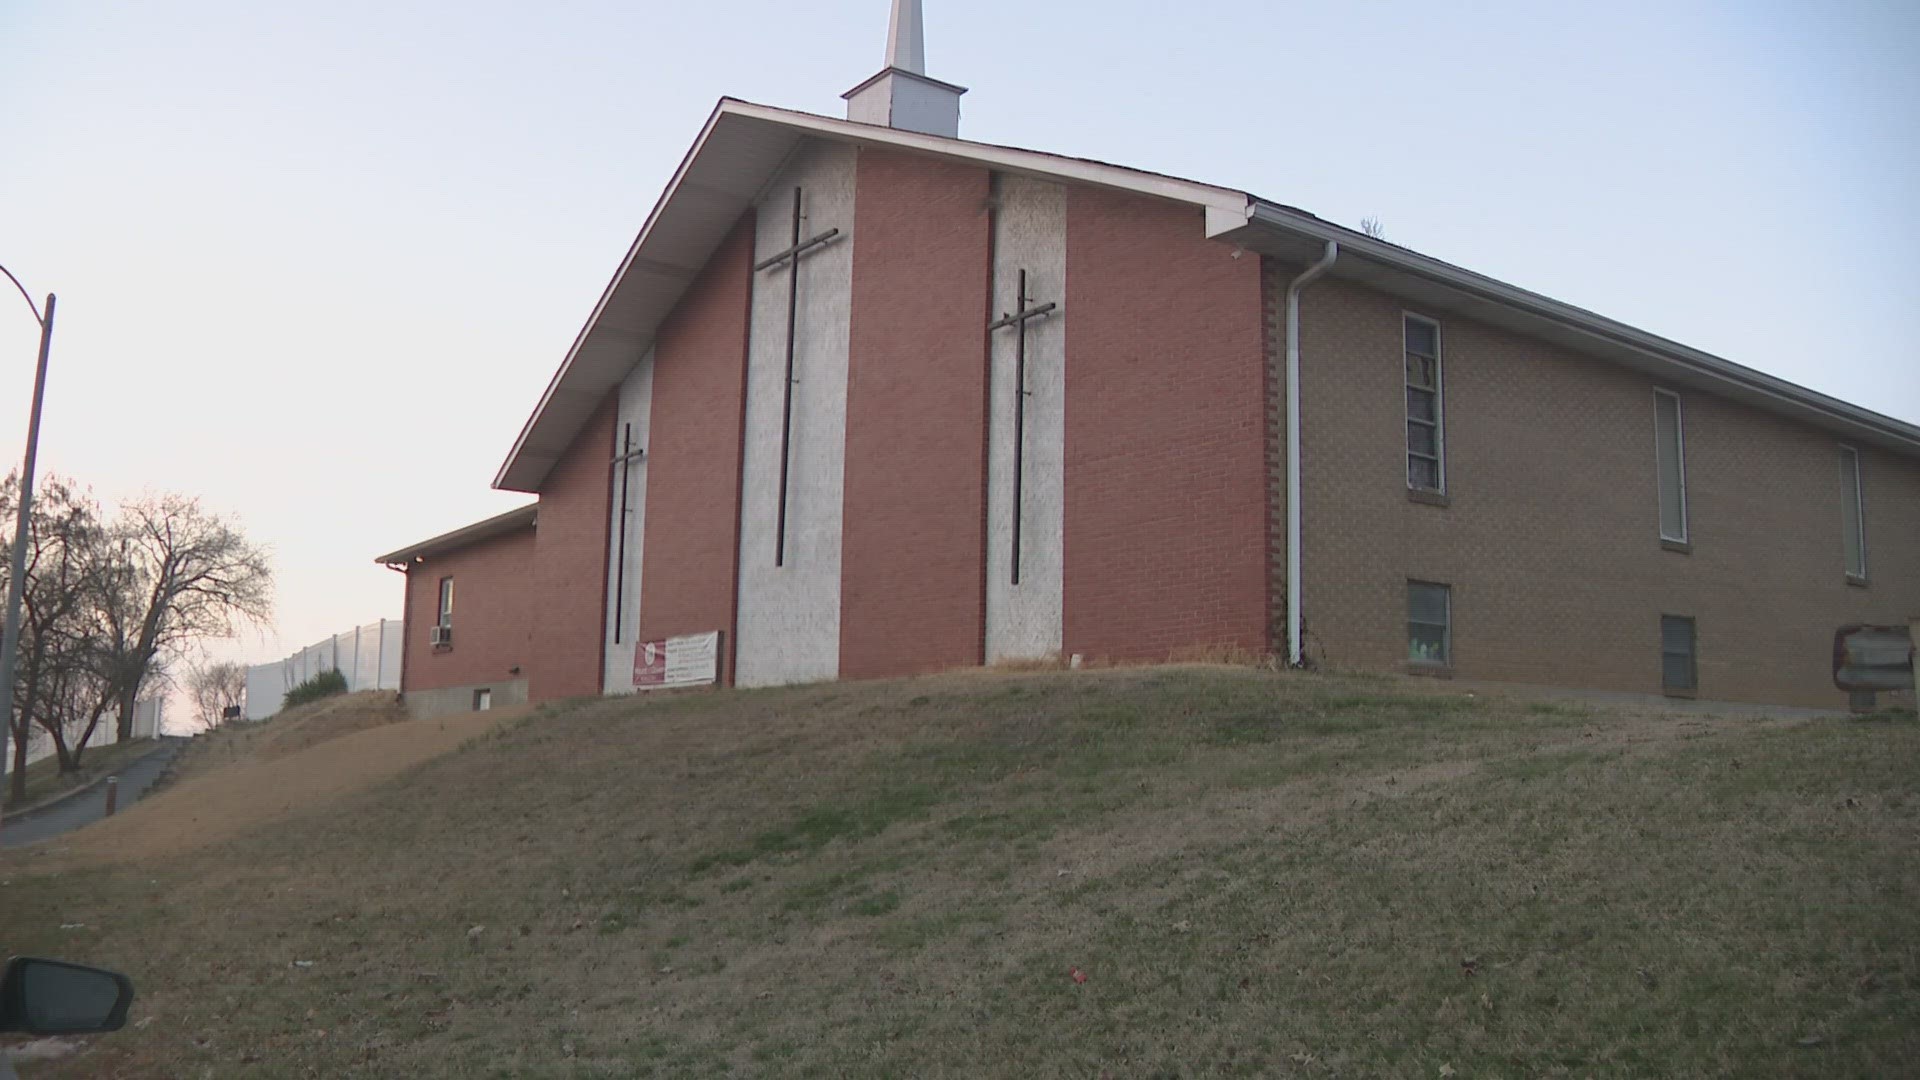 Three men are facing charges after police said they held a woman captive and beat her inside a church in St. Louis' Patch neighborhood.